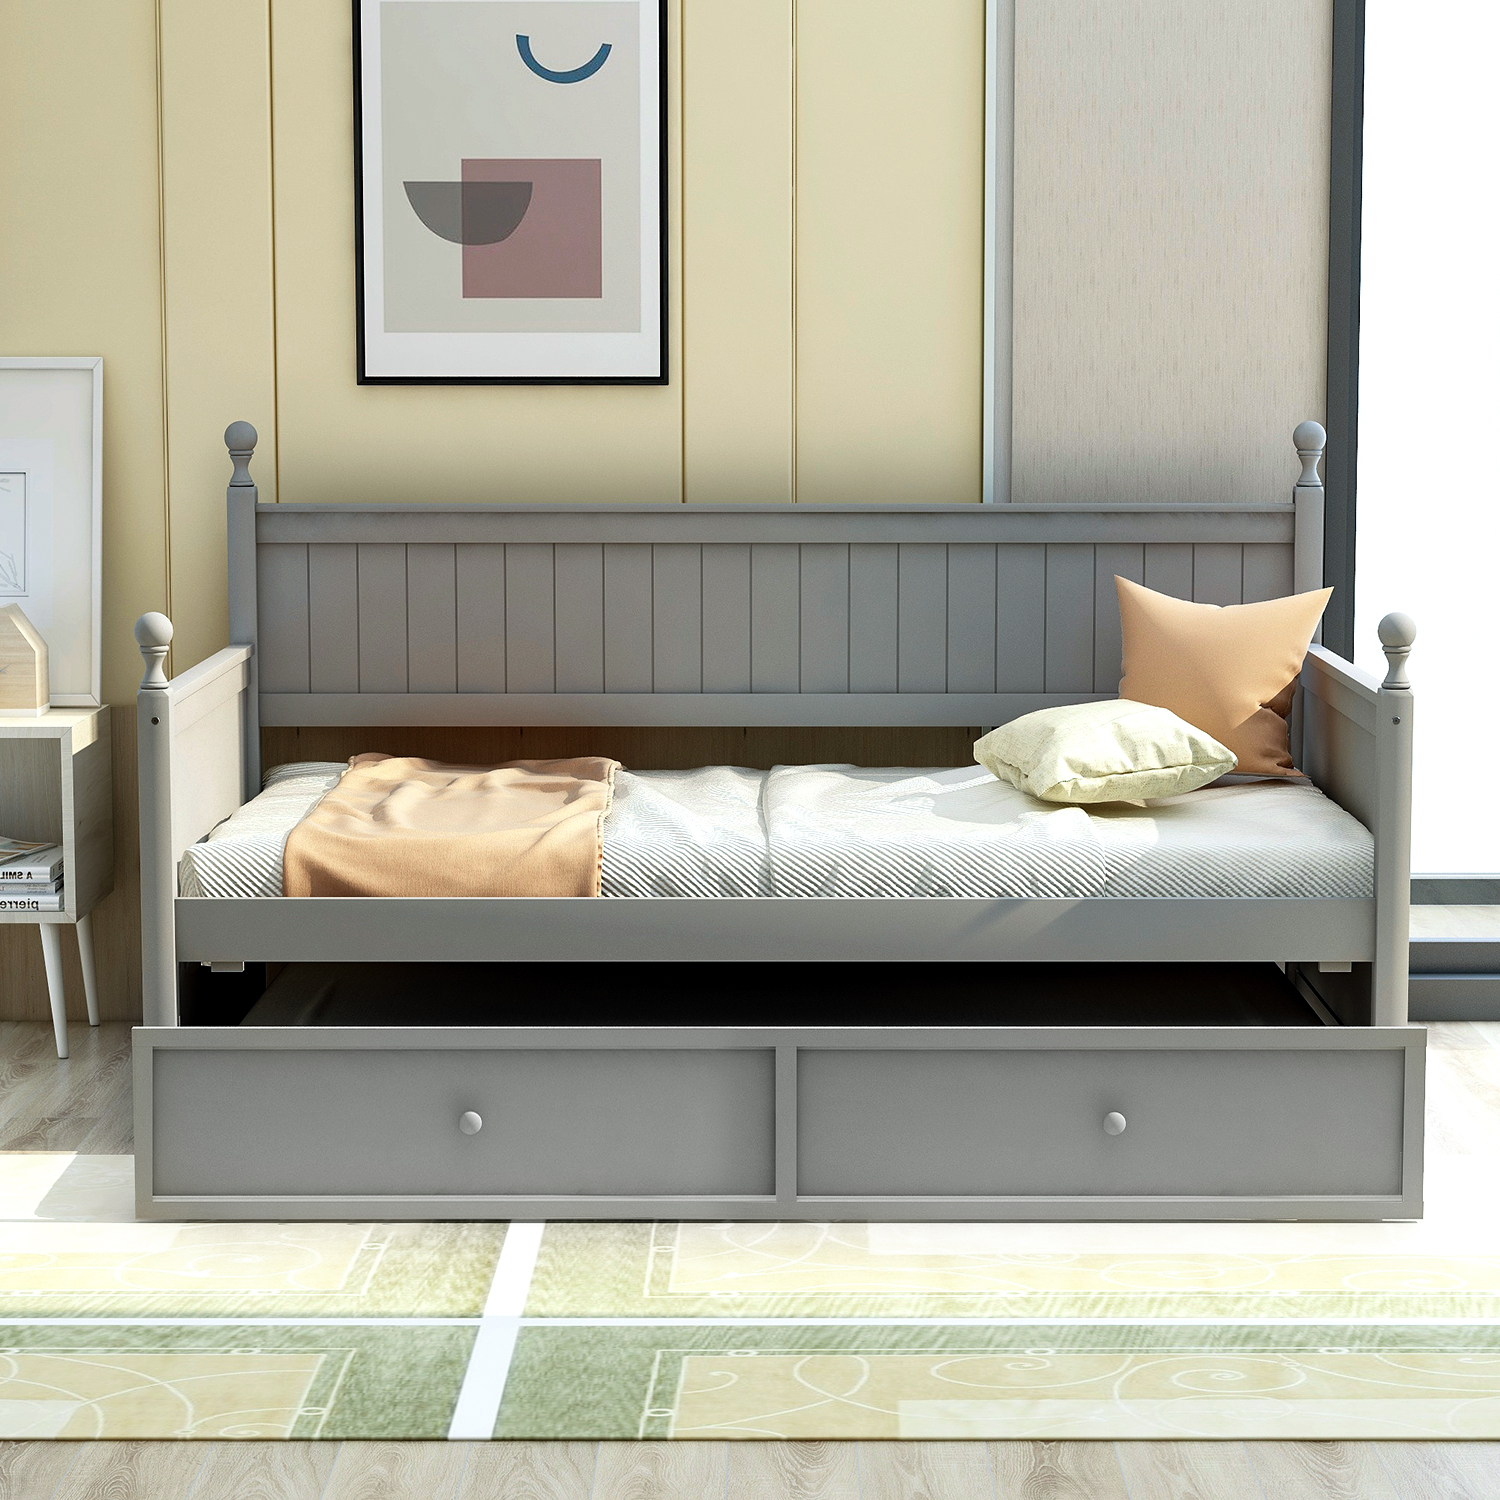 Kepooman Twin Size Modern Wooden Daybed Frame with Twin Size Trundle & Headboard for Bedroom Dorm, 80.5" x 42.1" x 45.41", Gray - image 1 of 14